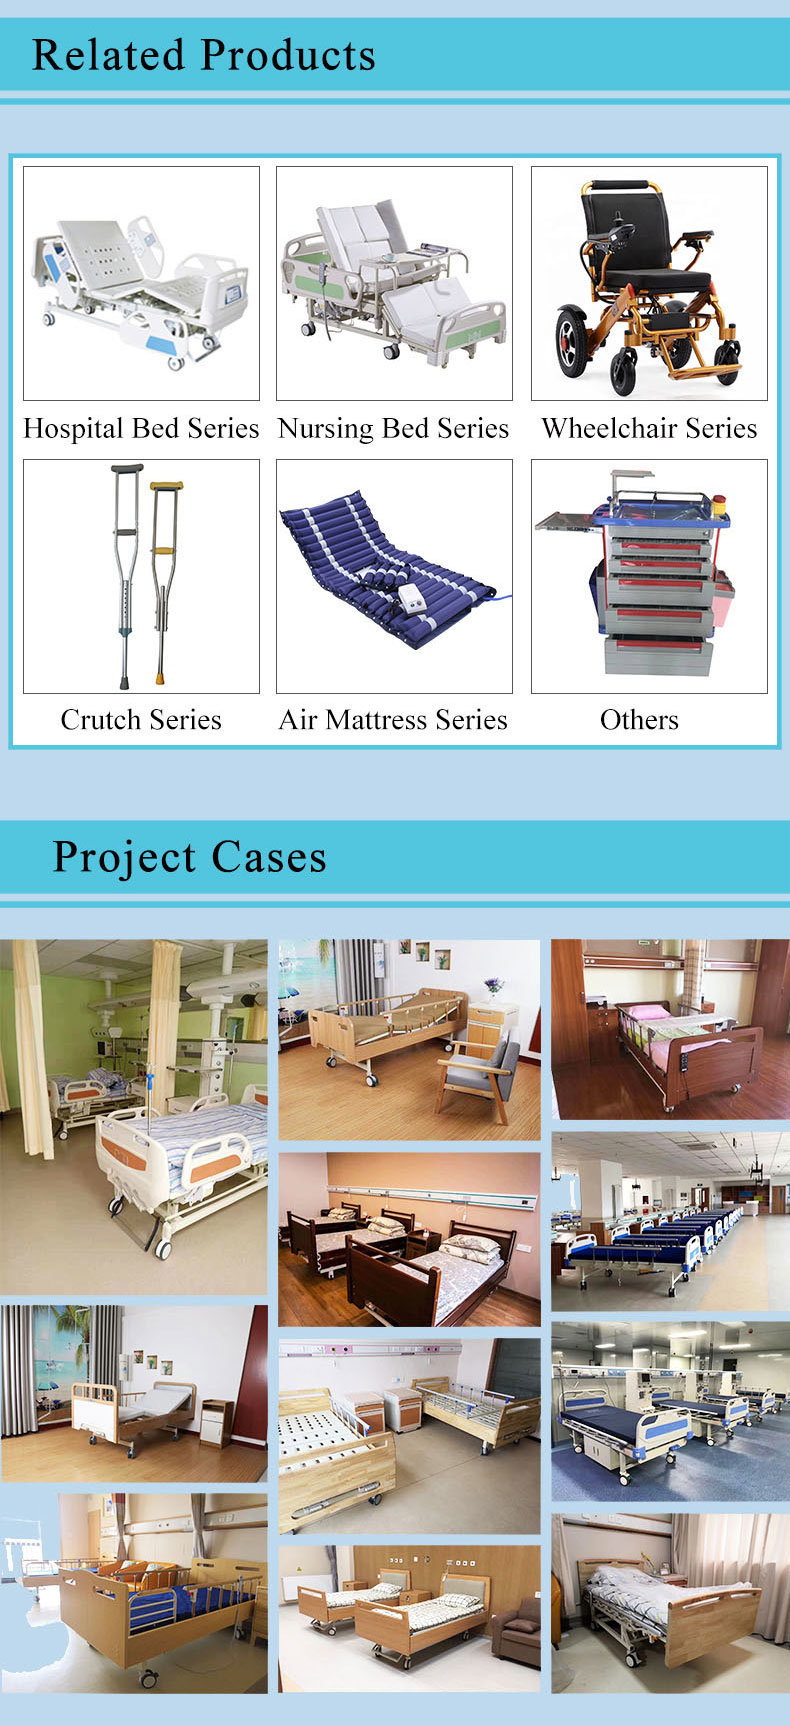 China Wholesale Supplier Brand New Clinical Beds Not Second Hand Hospital Beds for Patients